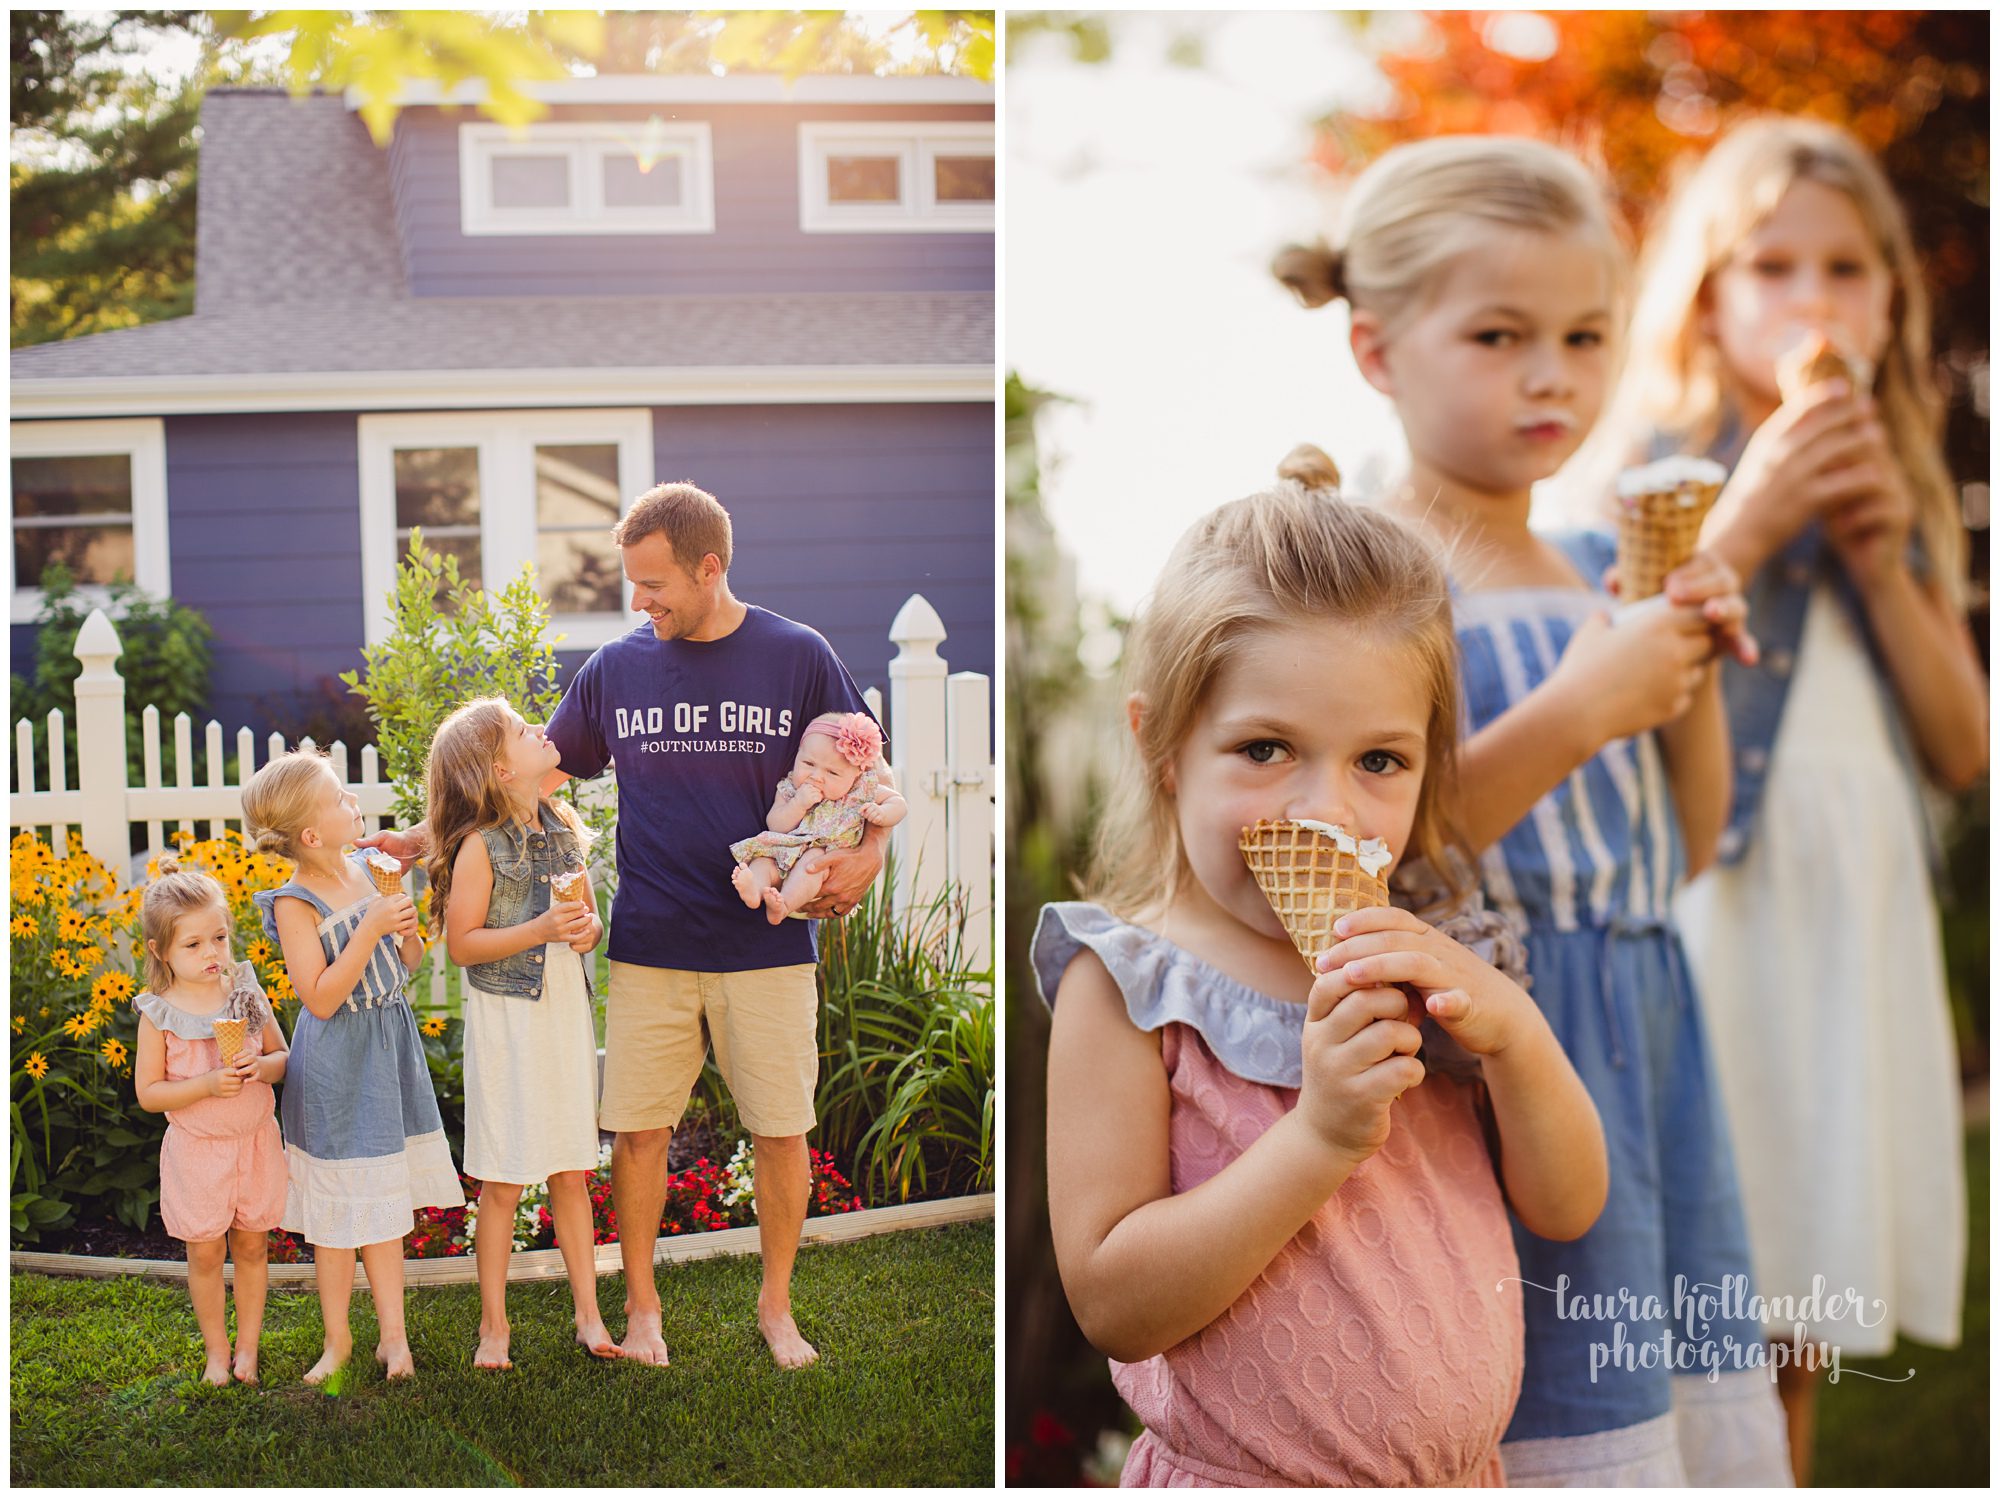 family of 6, four daughters with dad, family portraits with ice cream, Laura Hollander Photography Battle Creek MI